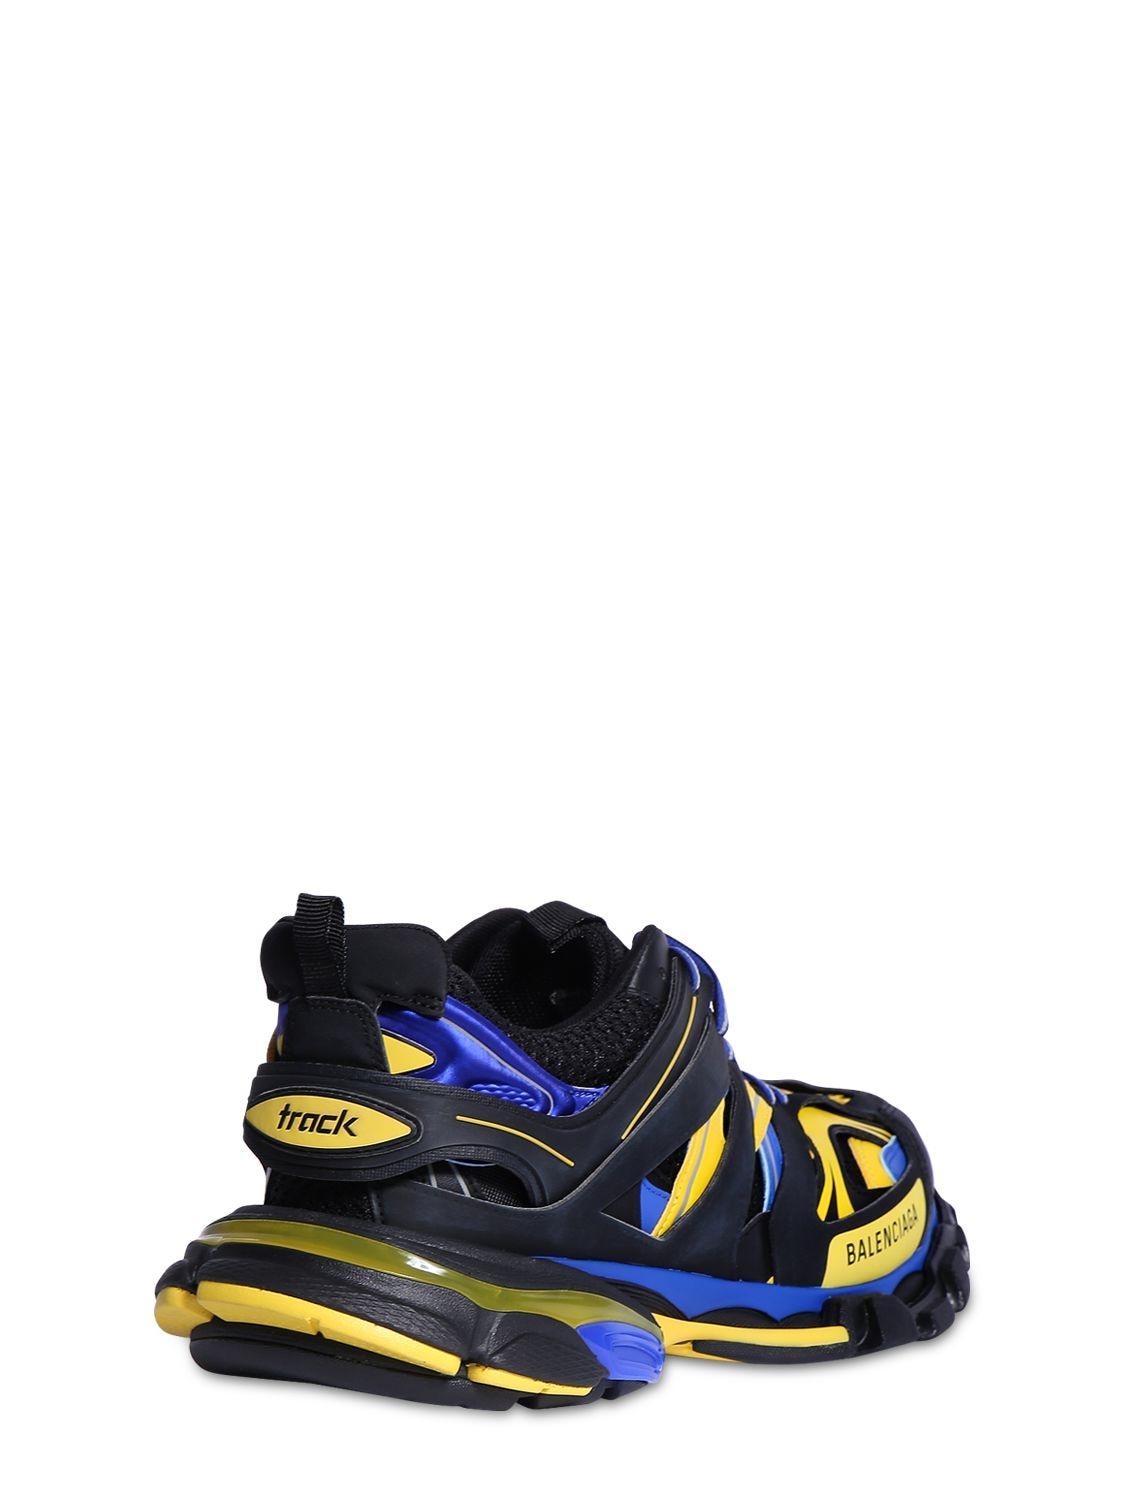 Balenciaga Synthetic Track Sneaker in Black/Yellow/Blue (Blue) for Men |  Lyst